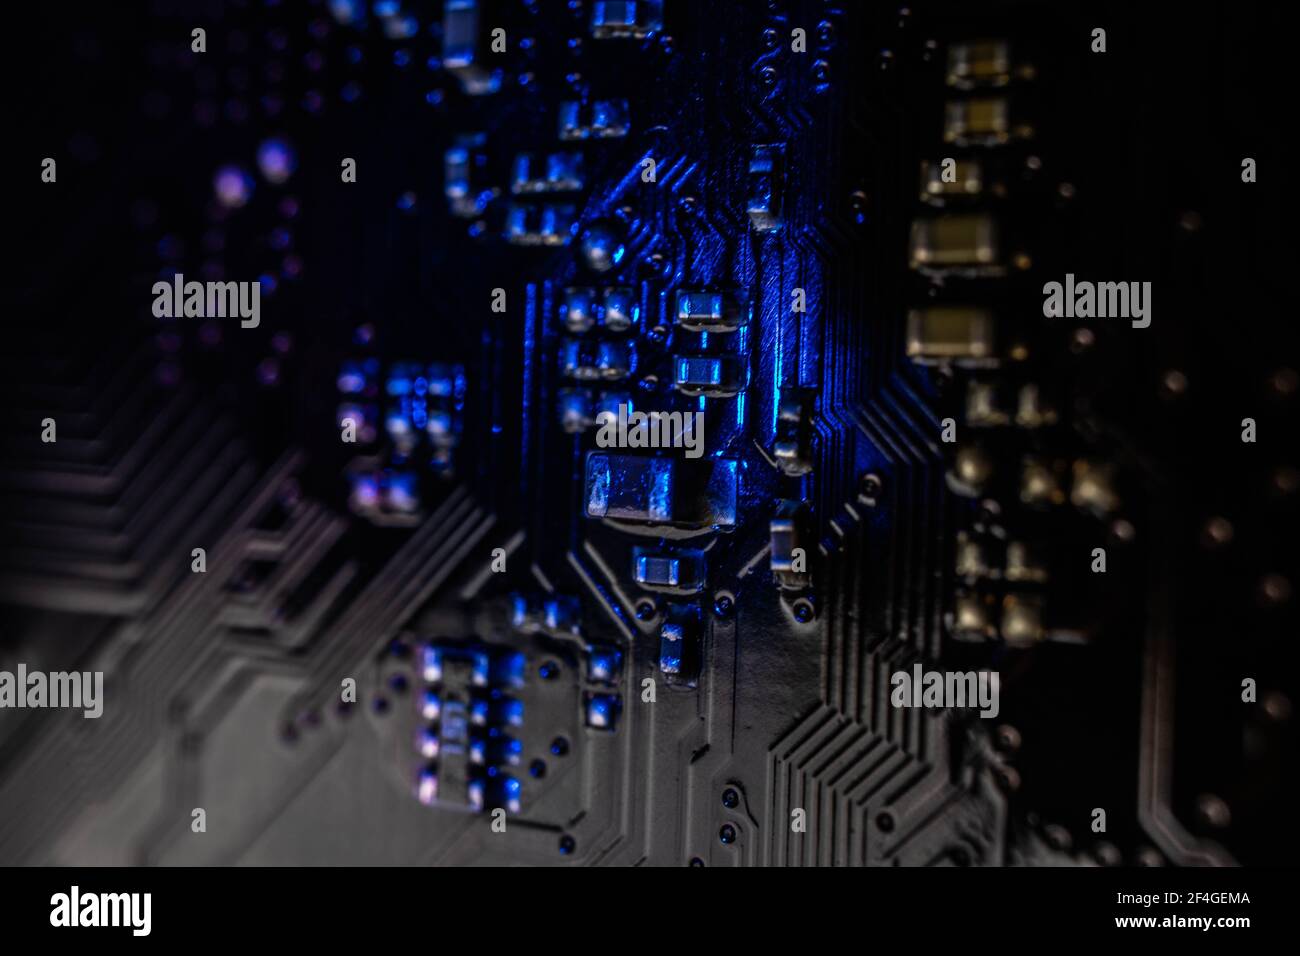 Computer motherboard. Motherboard digital chip. Technology background Stock Photo